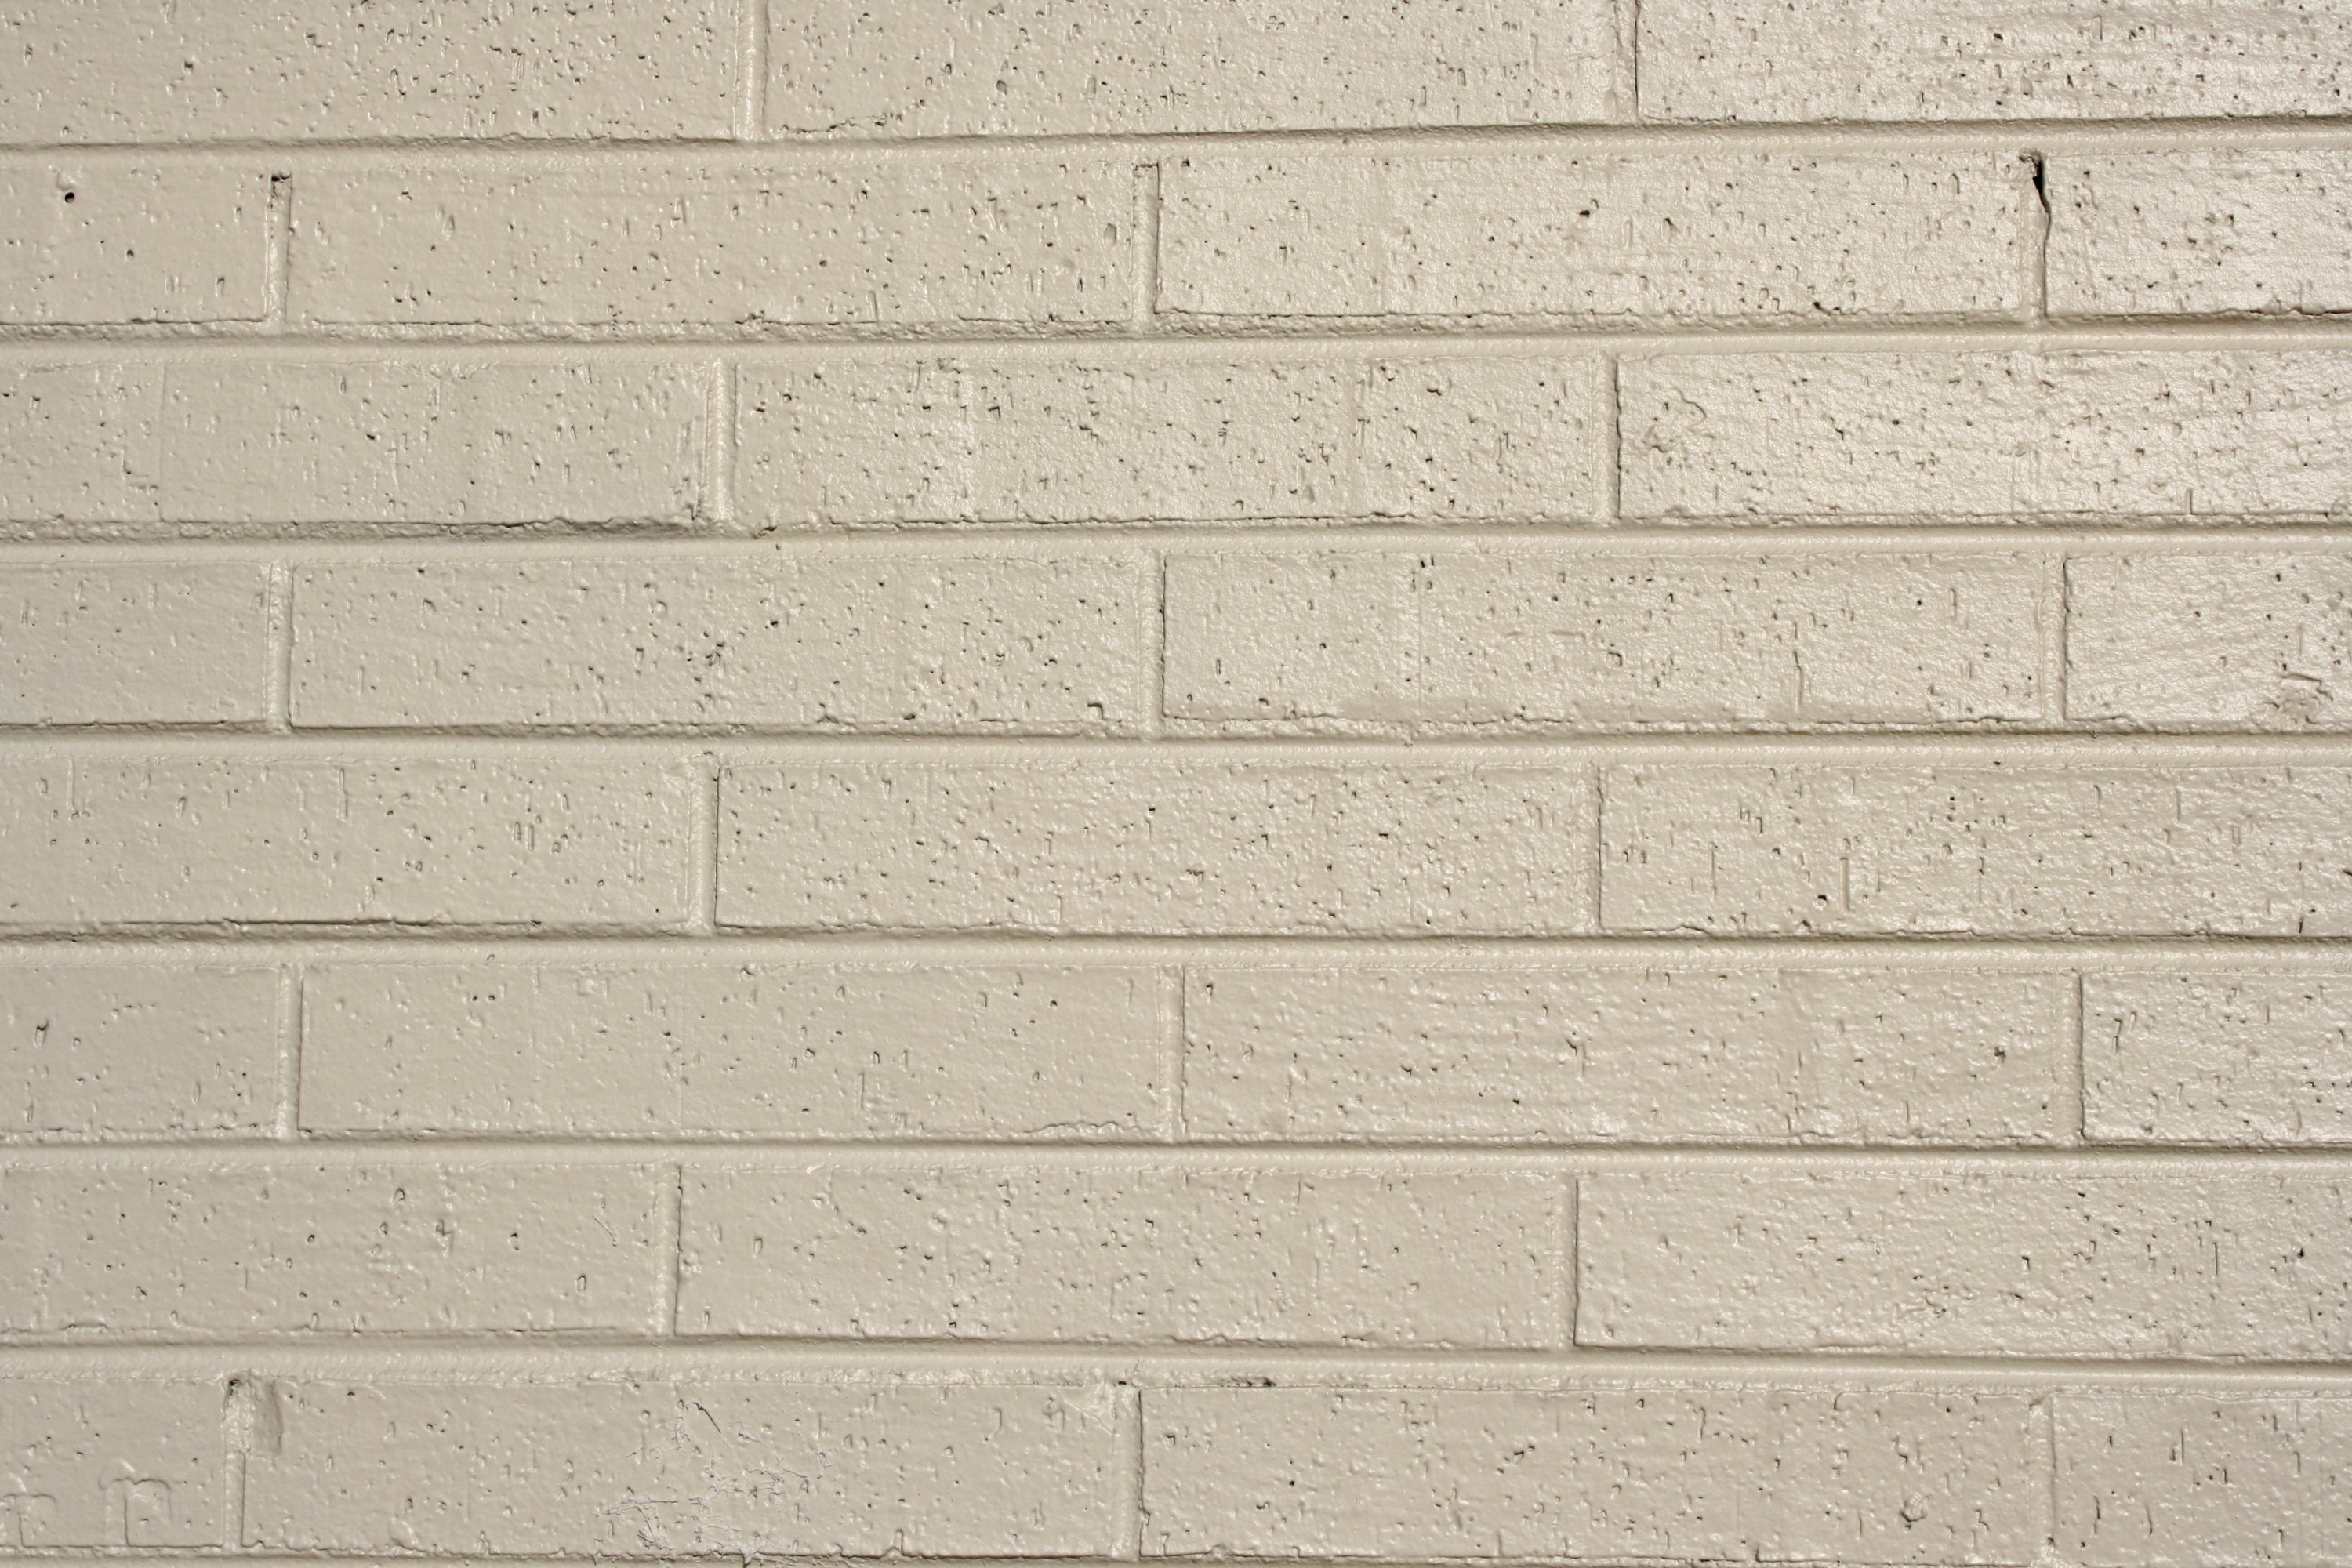 Painted Bricks Texture For Background Or Wallpaper Dimensions